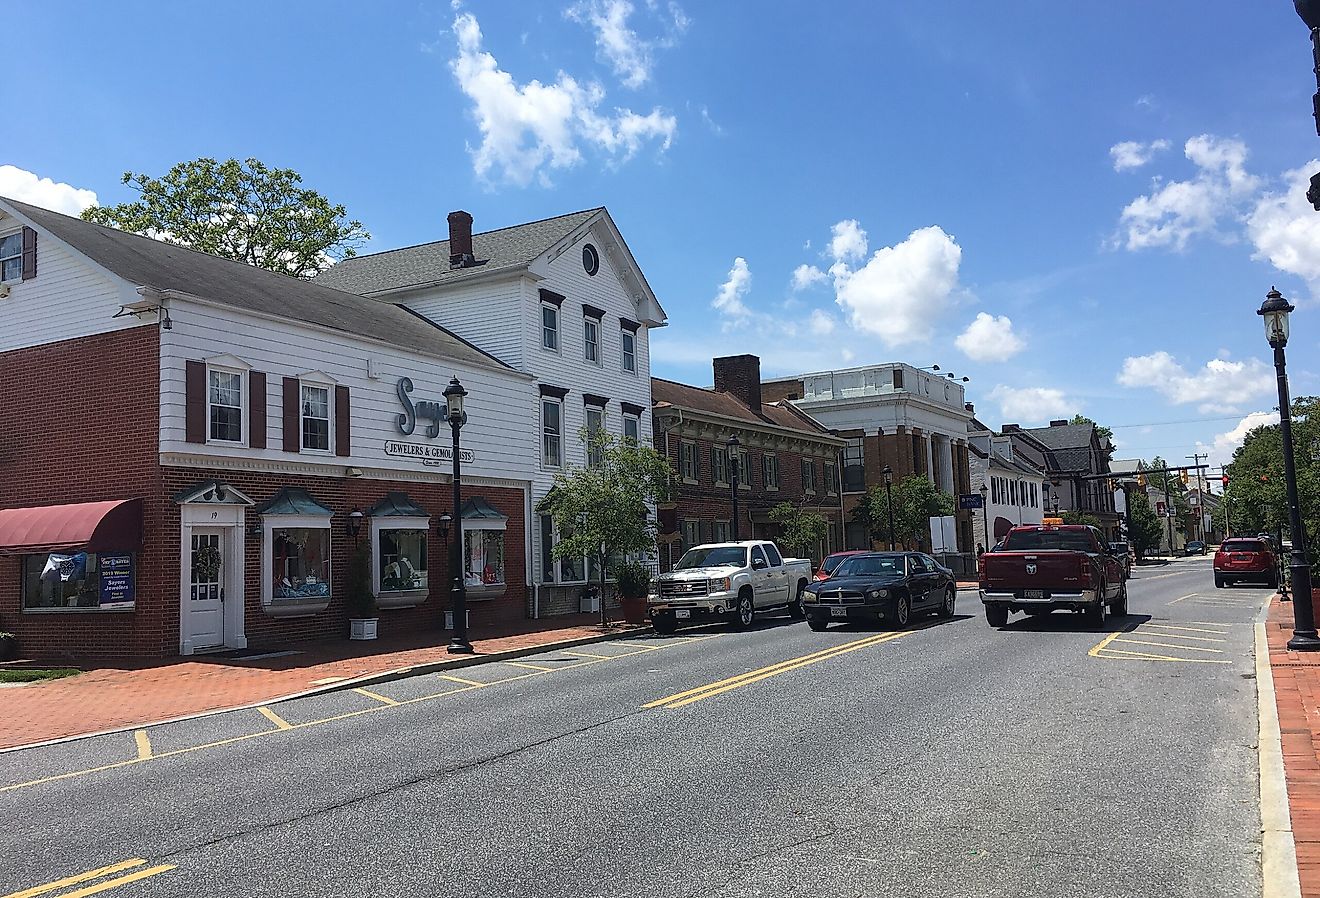 Northbound Main Street in Smyrna, Delaware. Image credit Dough4872, CC BY-SA 4.0 <https://creativecommons.org/licenses/by-sa/4.0>, via Wikimedia Commons